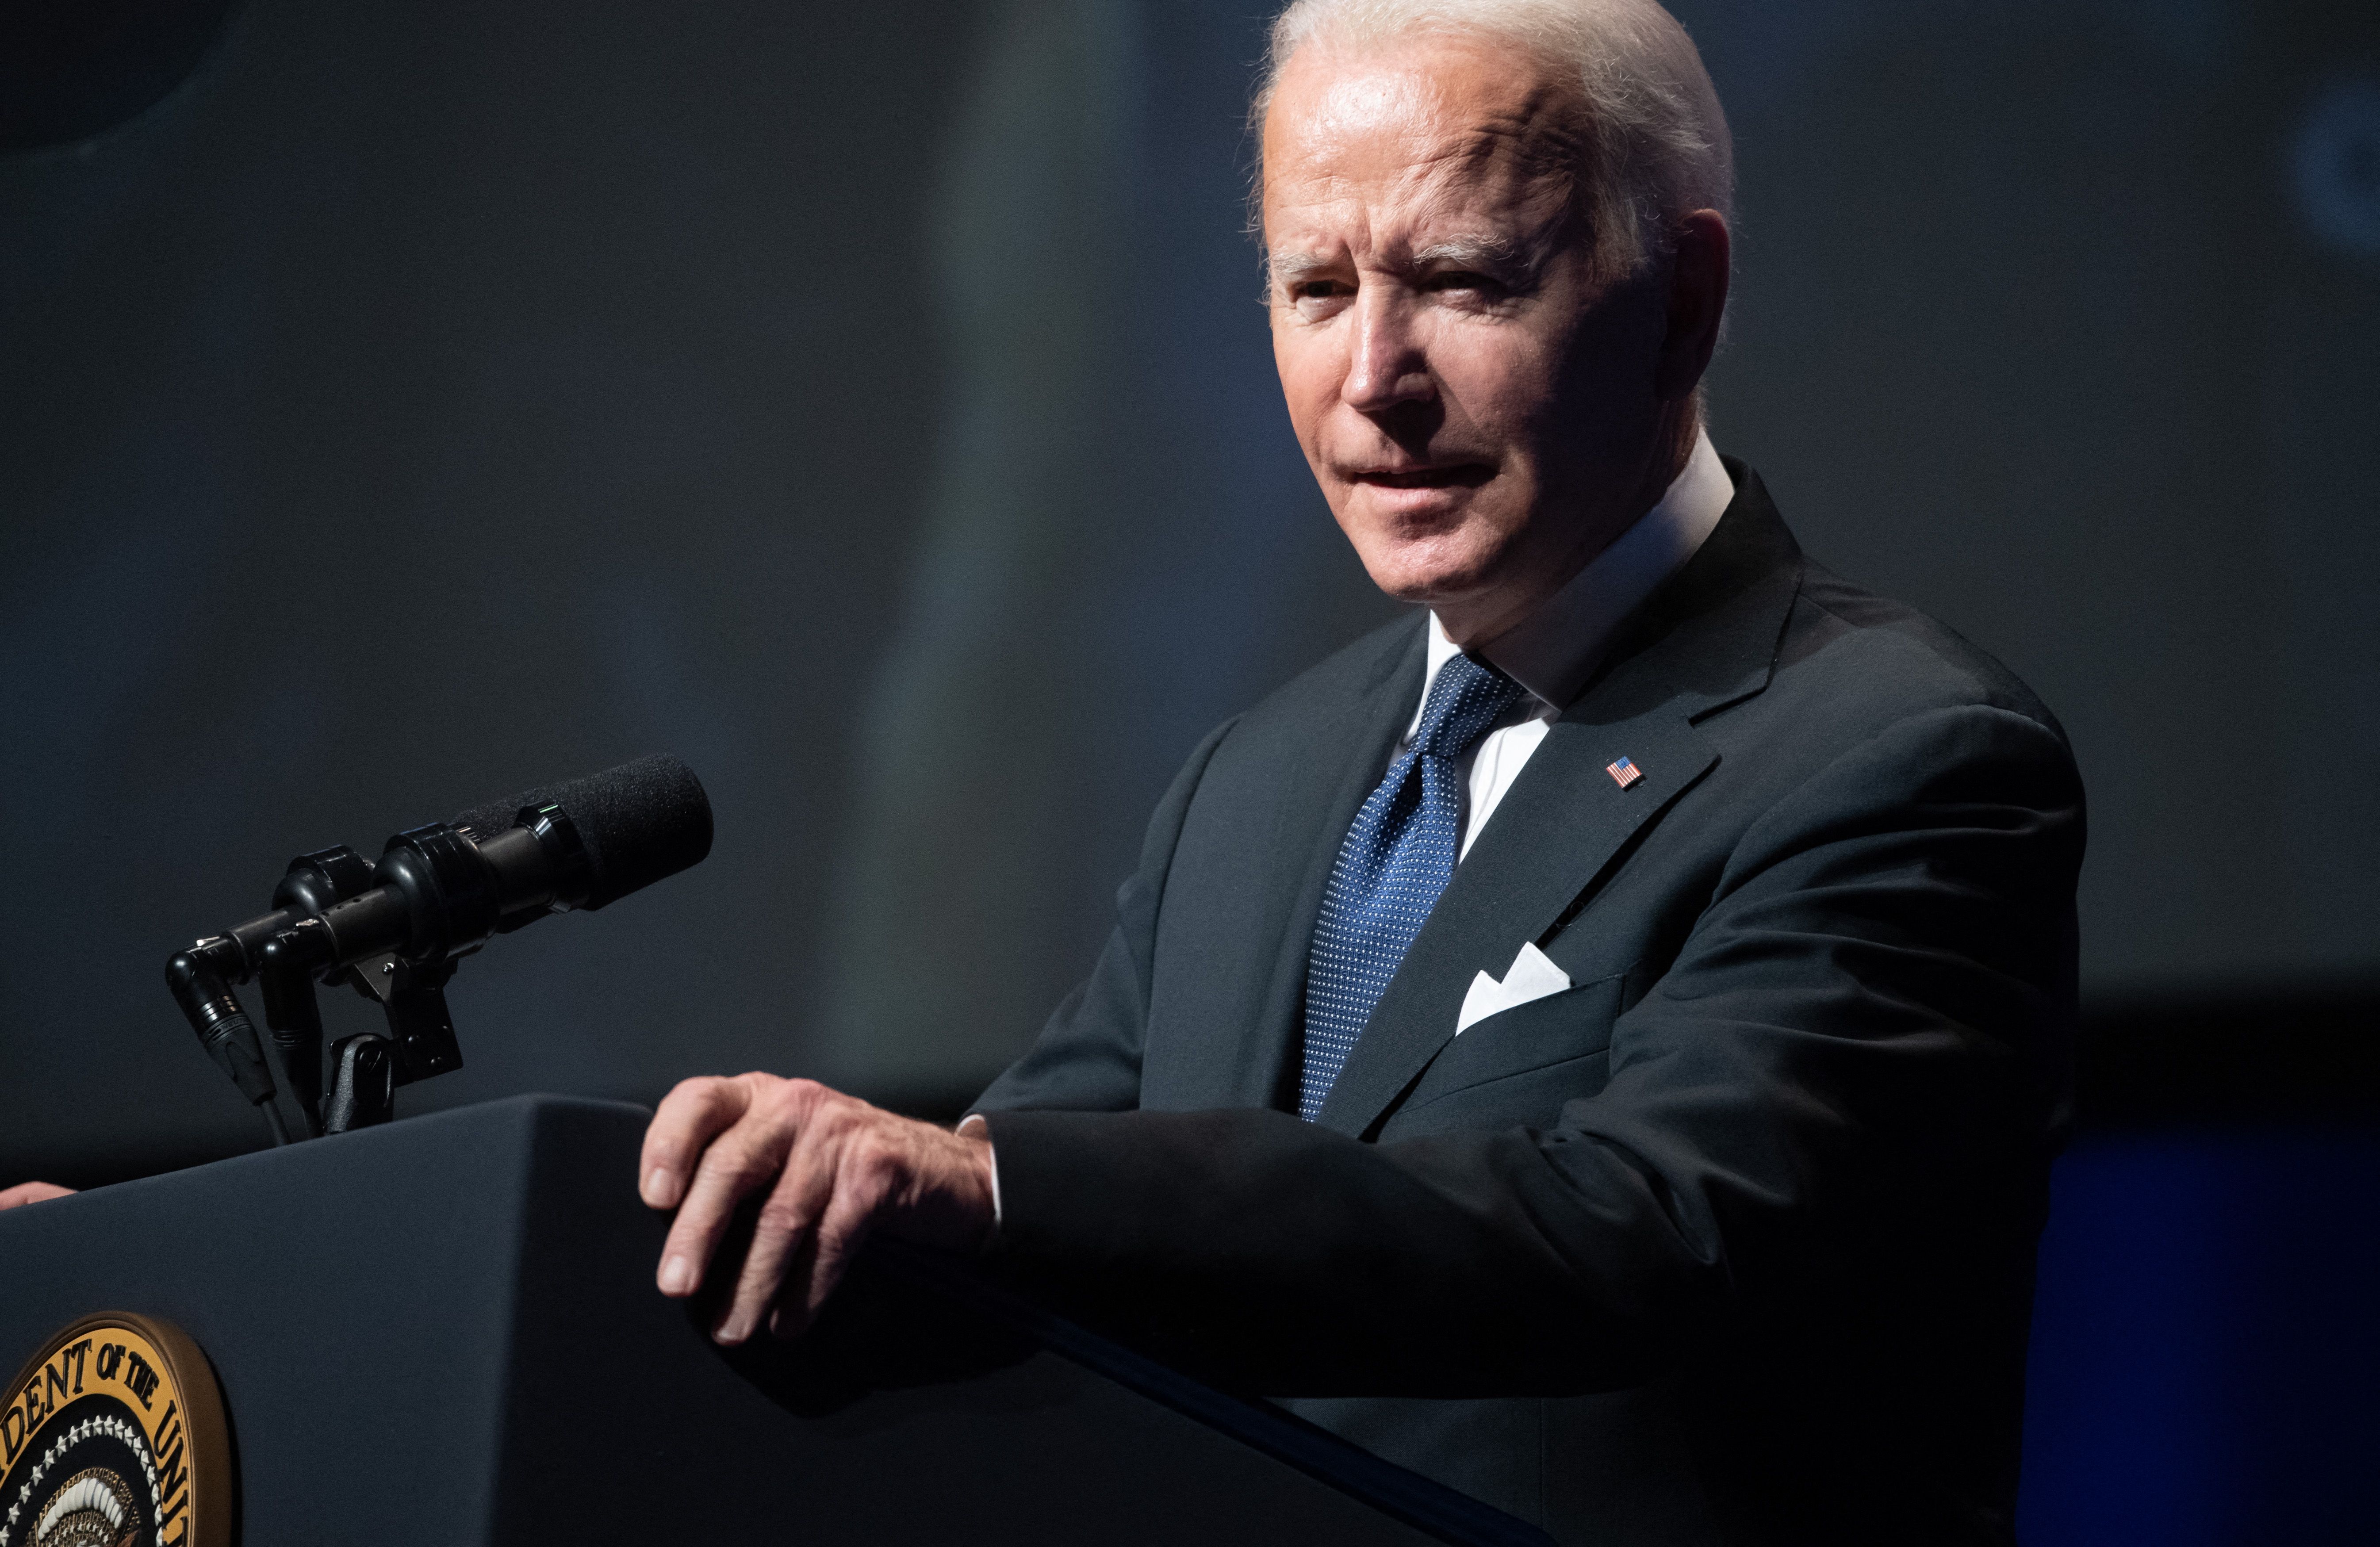 President Joe Biden speaks during a memorial service for the late US Senate Majority Leader Harry Reid at The Smith Center for the Performing Arts in Las Vegas, Nevada, January 8, 2022